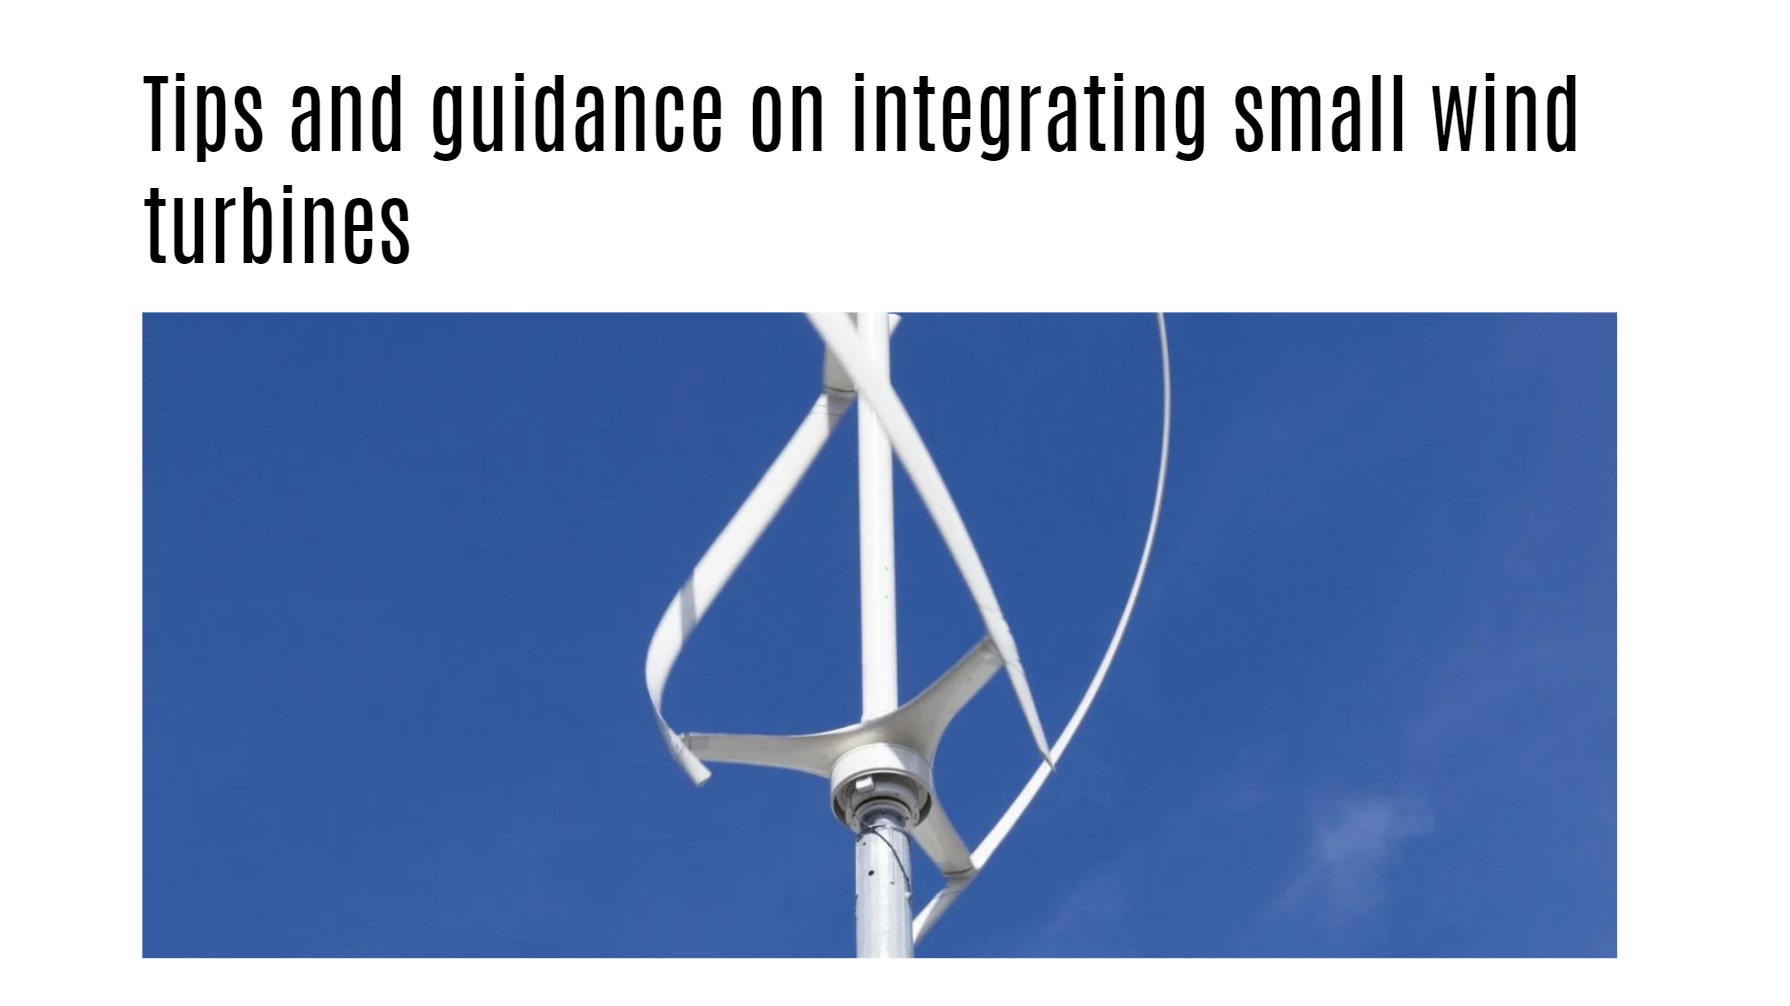 Tips and guidance on integrating small wind turbines